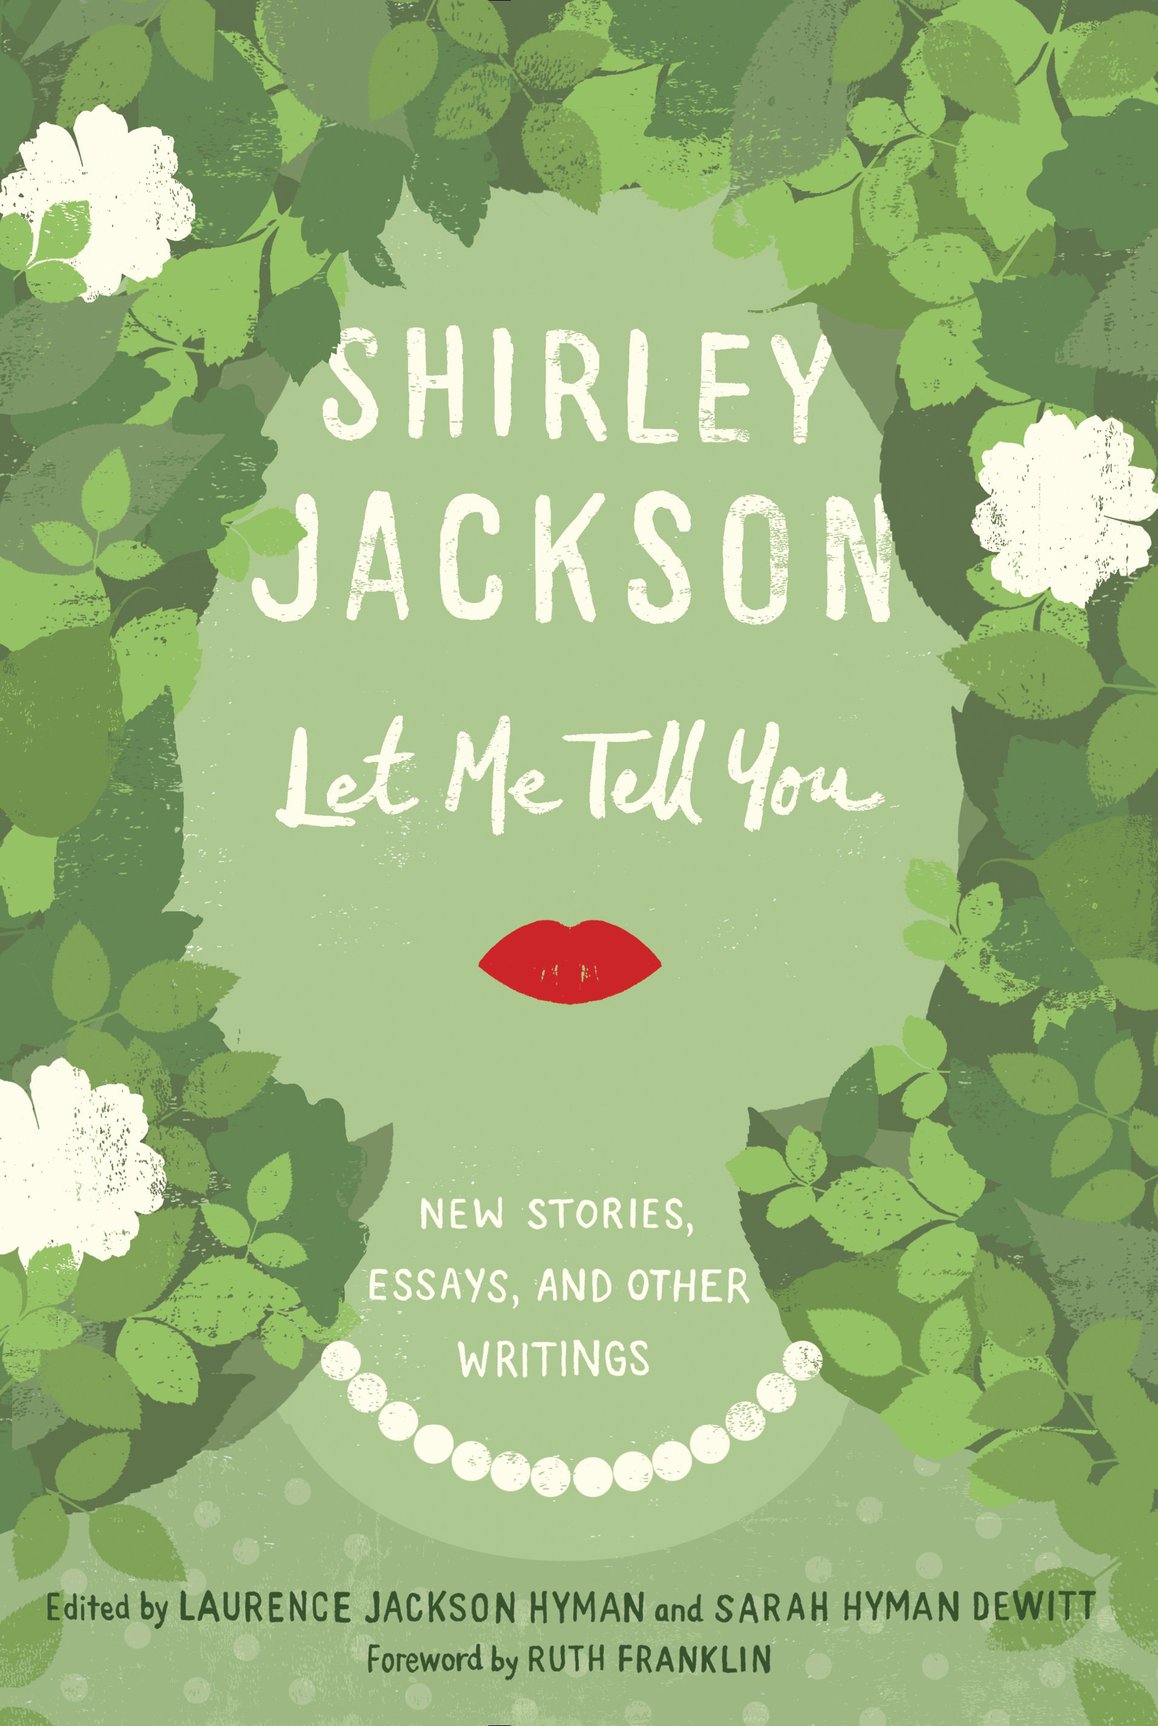 Let Me Tell You (2015) by Shirley Jackson